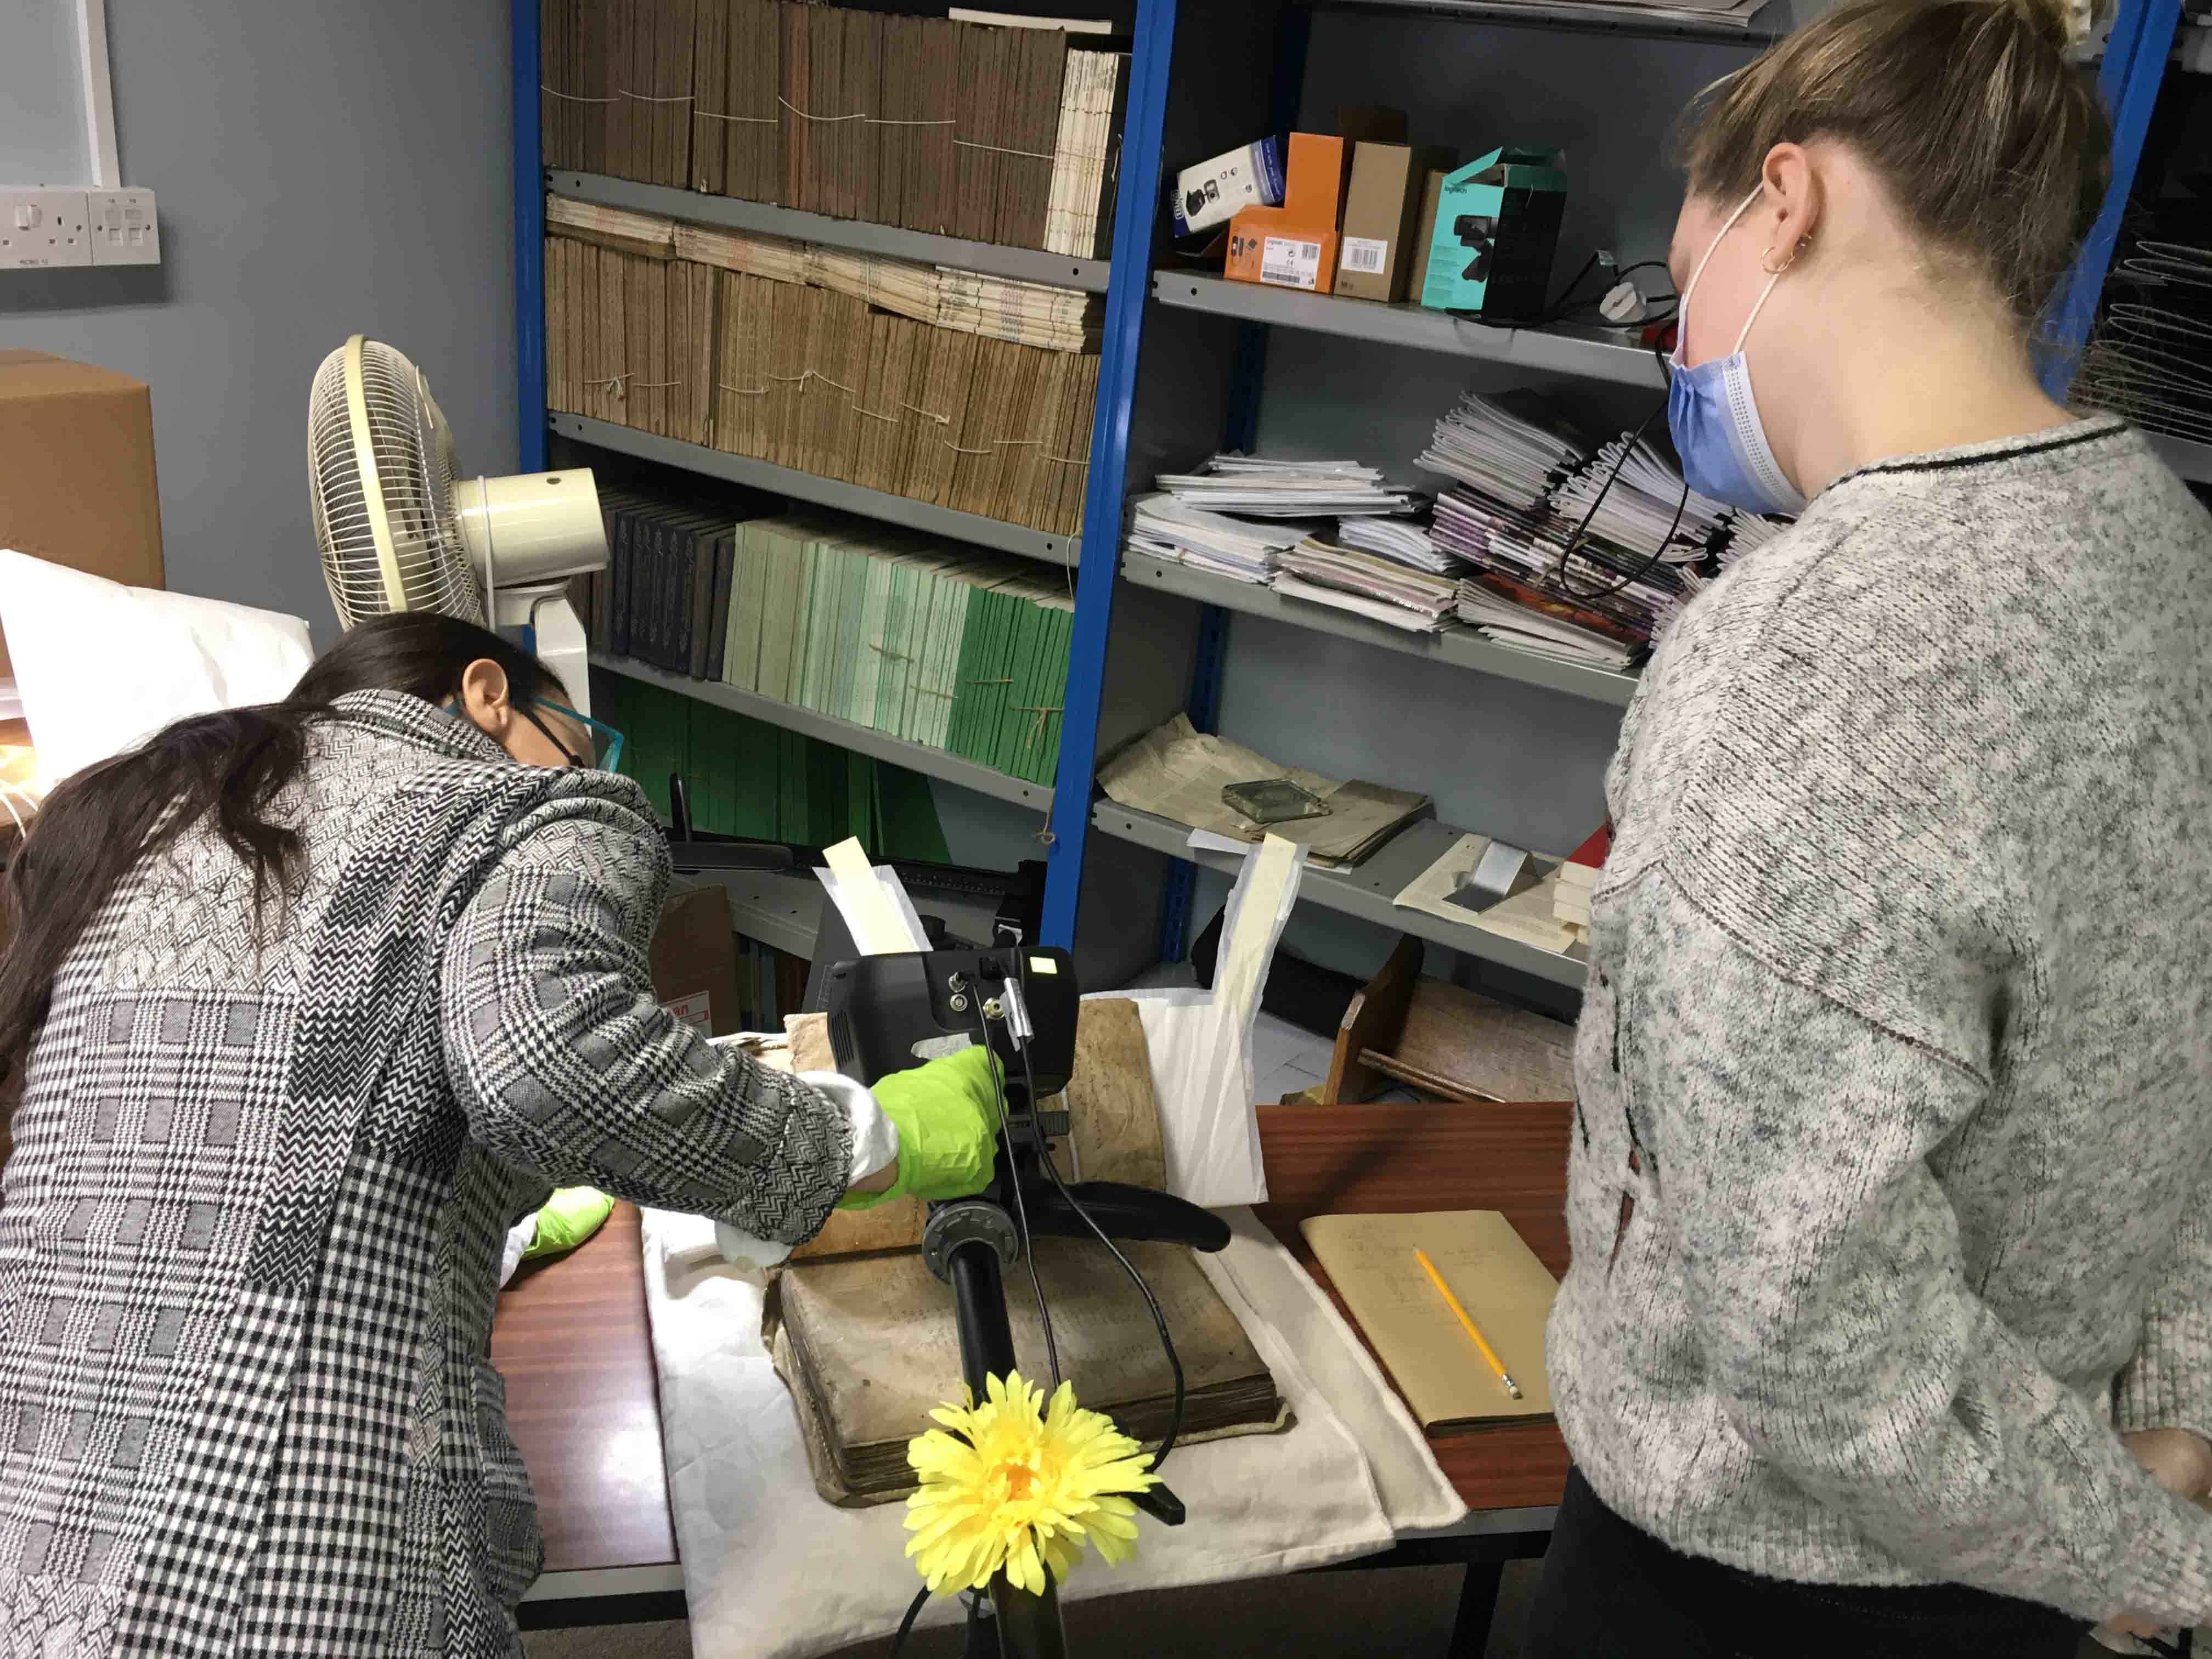 Professor Pádraig Ó Macháin's PhD students (left) Veronica Biolcati, from Italy, working with (right) Anna Hoffmann, from New York, as they position the XRF scanner over the Red Book in the RCB Library.